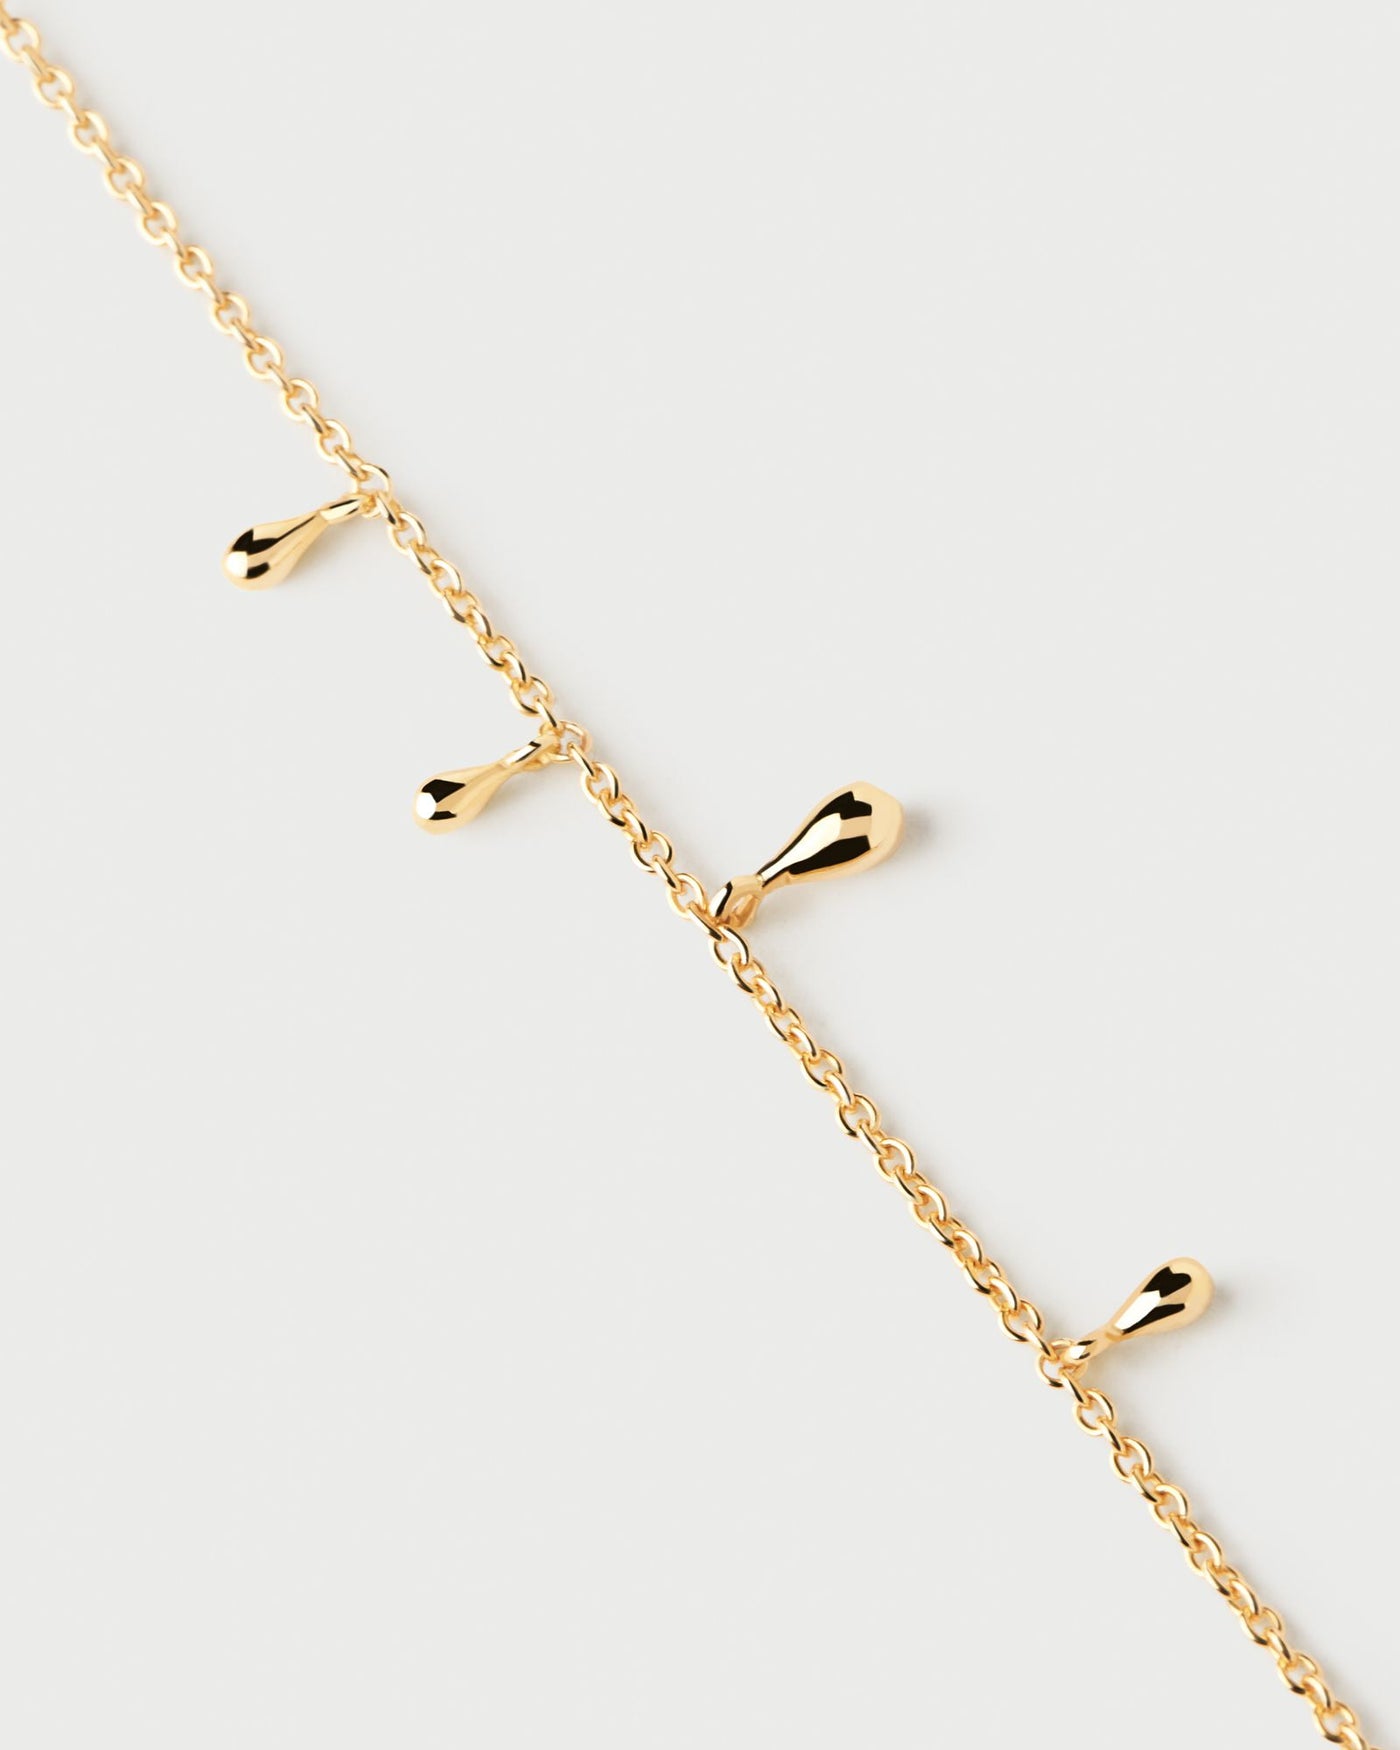 2024 Selection | Teardrop Bracelet. Gold-plated silver bracelet with small drop pendants. Get the latest arrival from PDPAOLA. Place your order safely and get this Best Seller. Free Shipping.